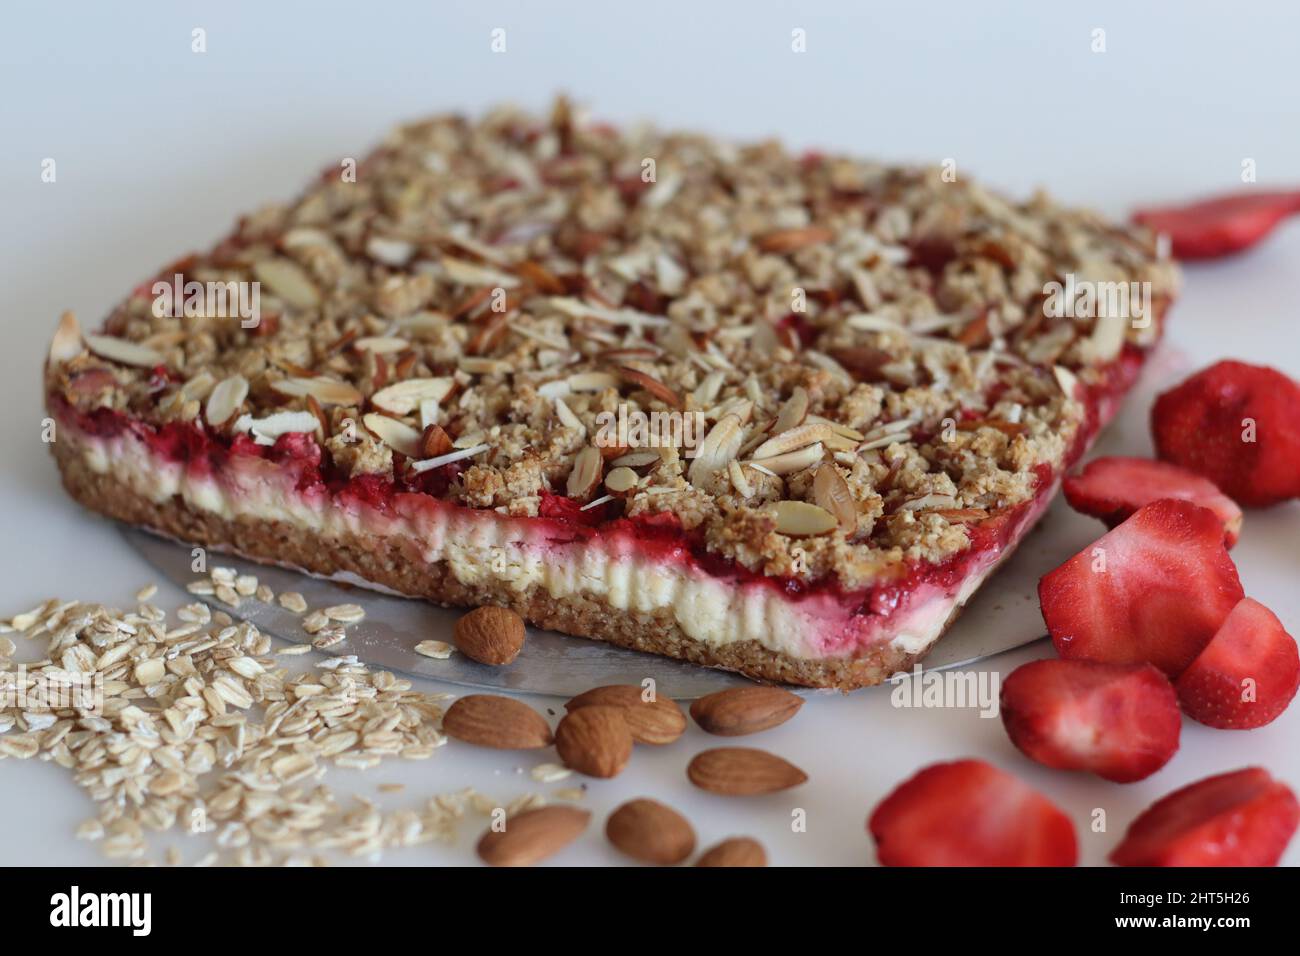 Breakfast bar, fresh from oven taken out of mould. No flour breakfast bar with rolled oats, almonds, cream cheese and fresh strawberries. Shot on whit Stock Photo